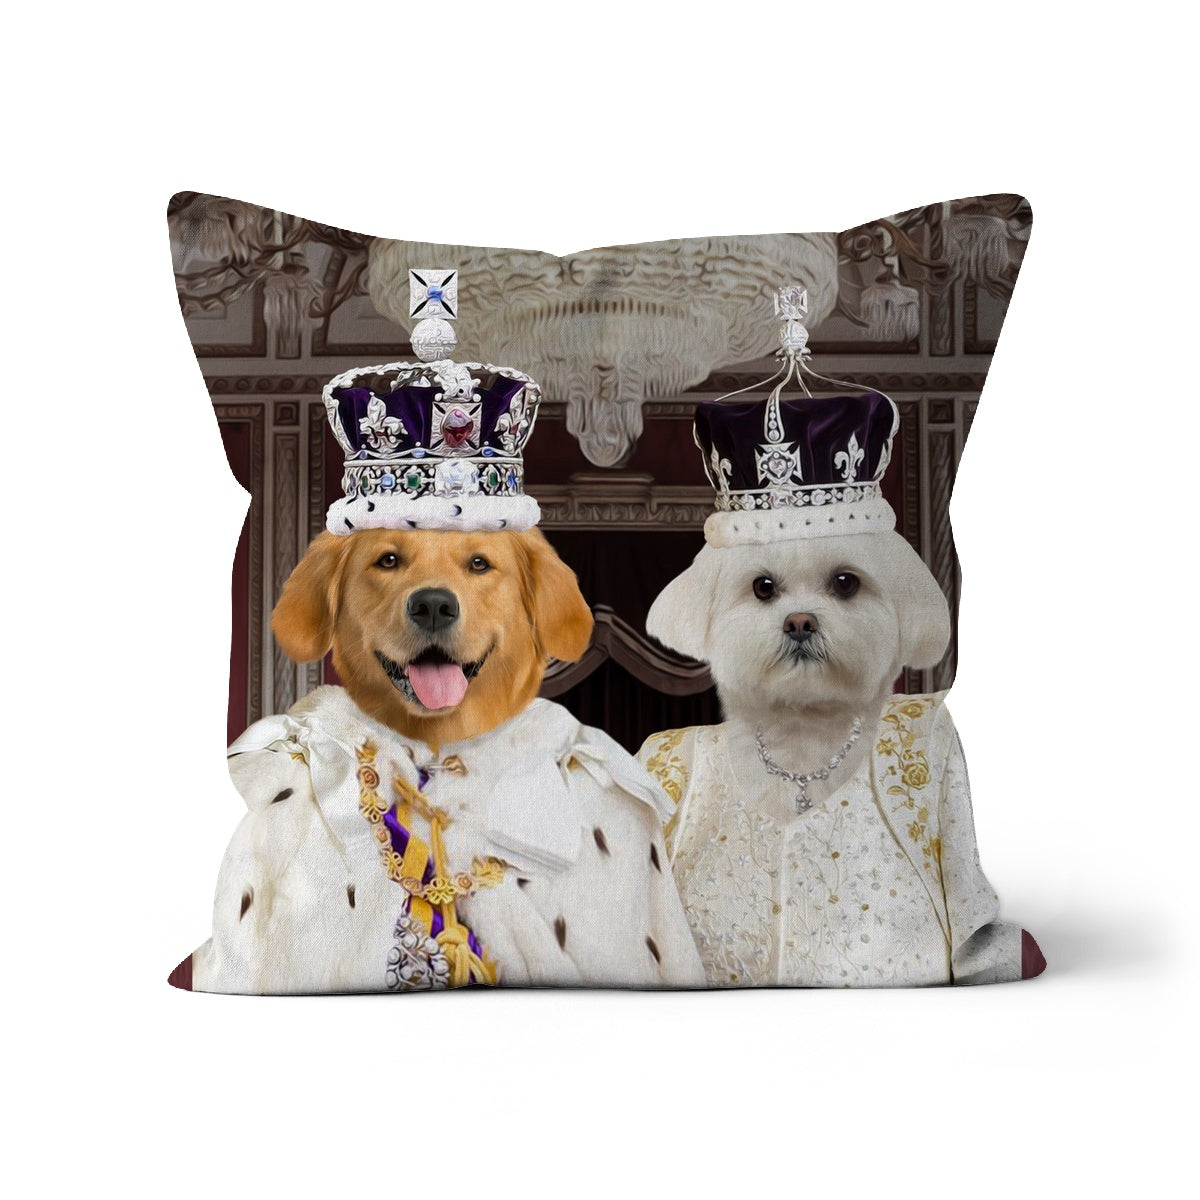 Paw & Glory, paw and glory, pet pillow picture, dog pillow custom, custom pillow design, customized throw pillows, dog on cushion, dog personalized pillow, Pet Portraits cushion,